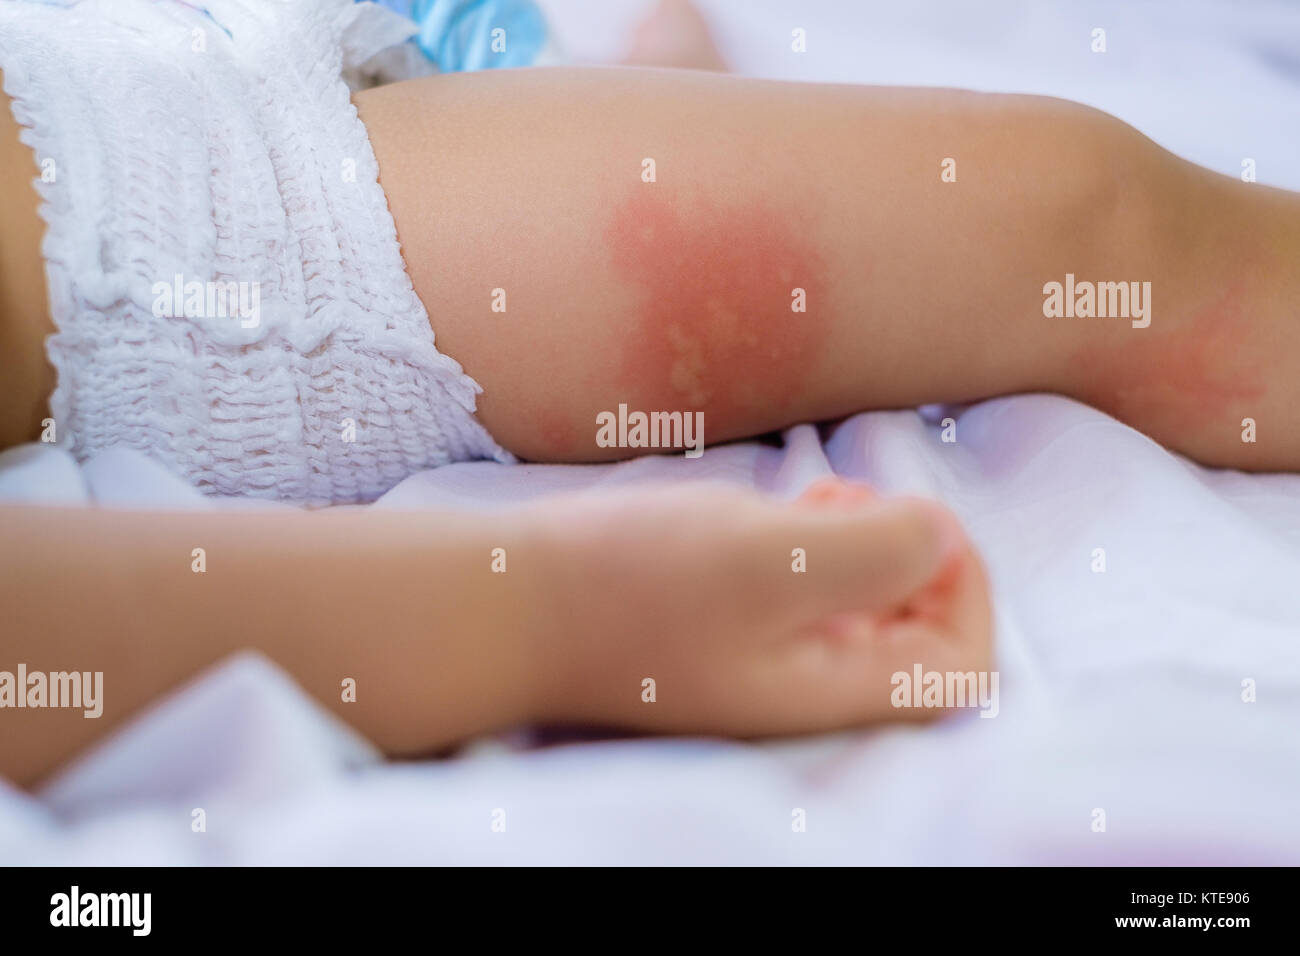 Leg of sleeping Small child with redness on the skin, suffering from food allergies,  Baby's leg covered by eczema. allergy baby skin dermatitis food. Stock Photo